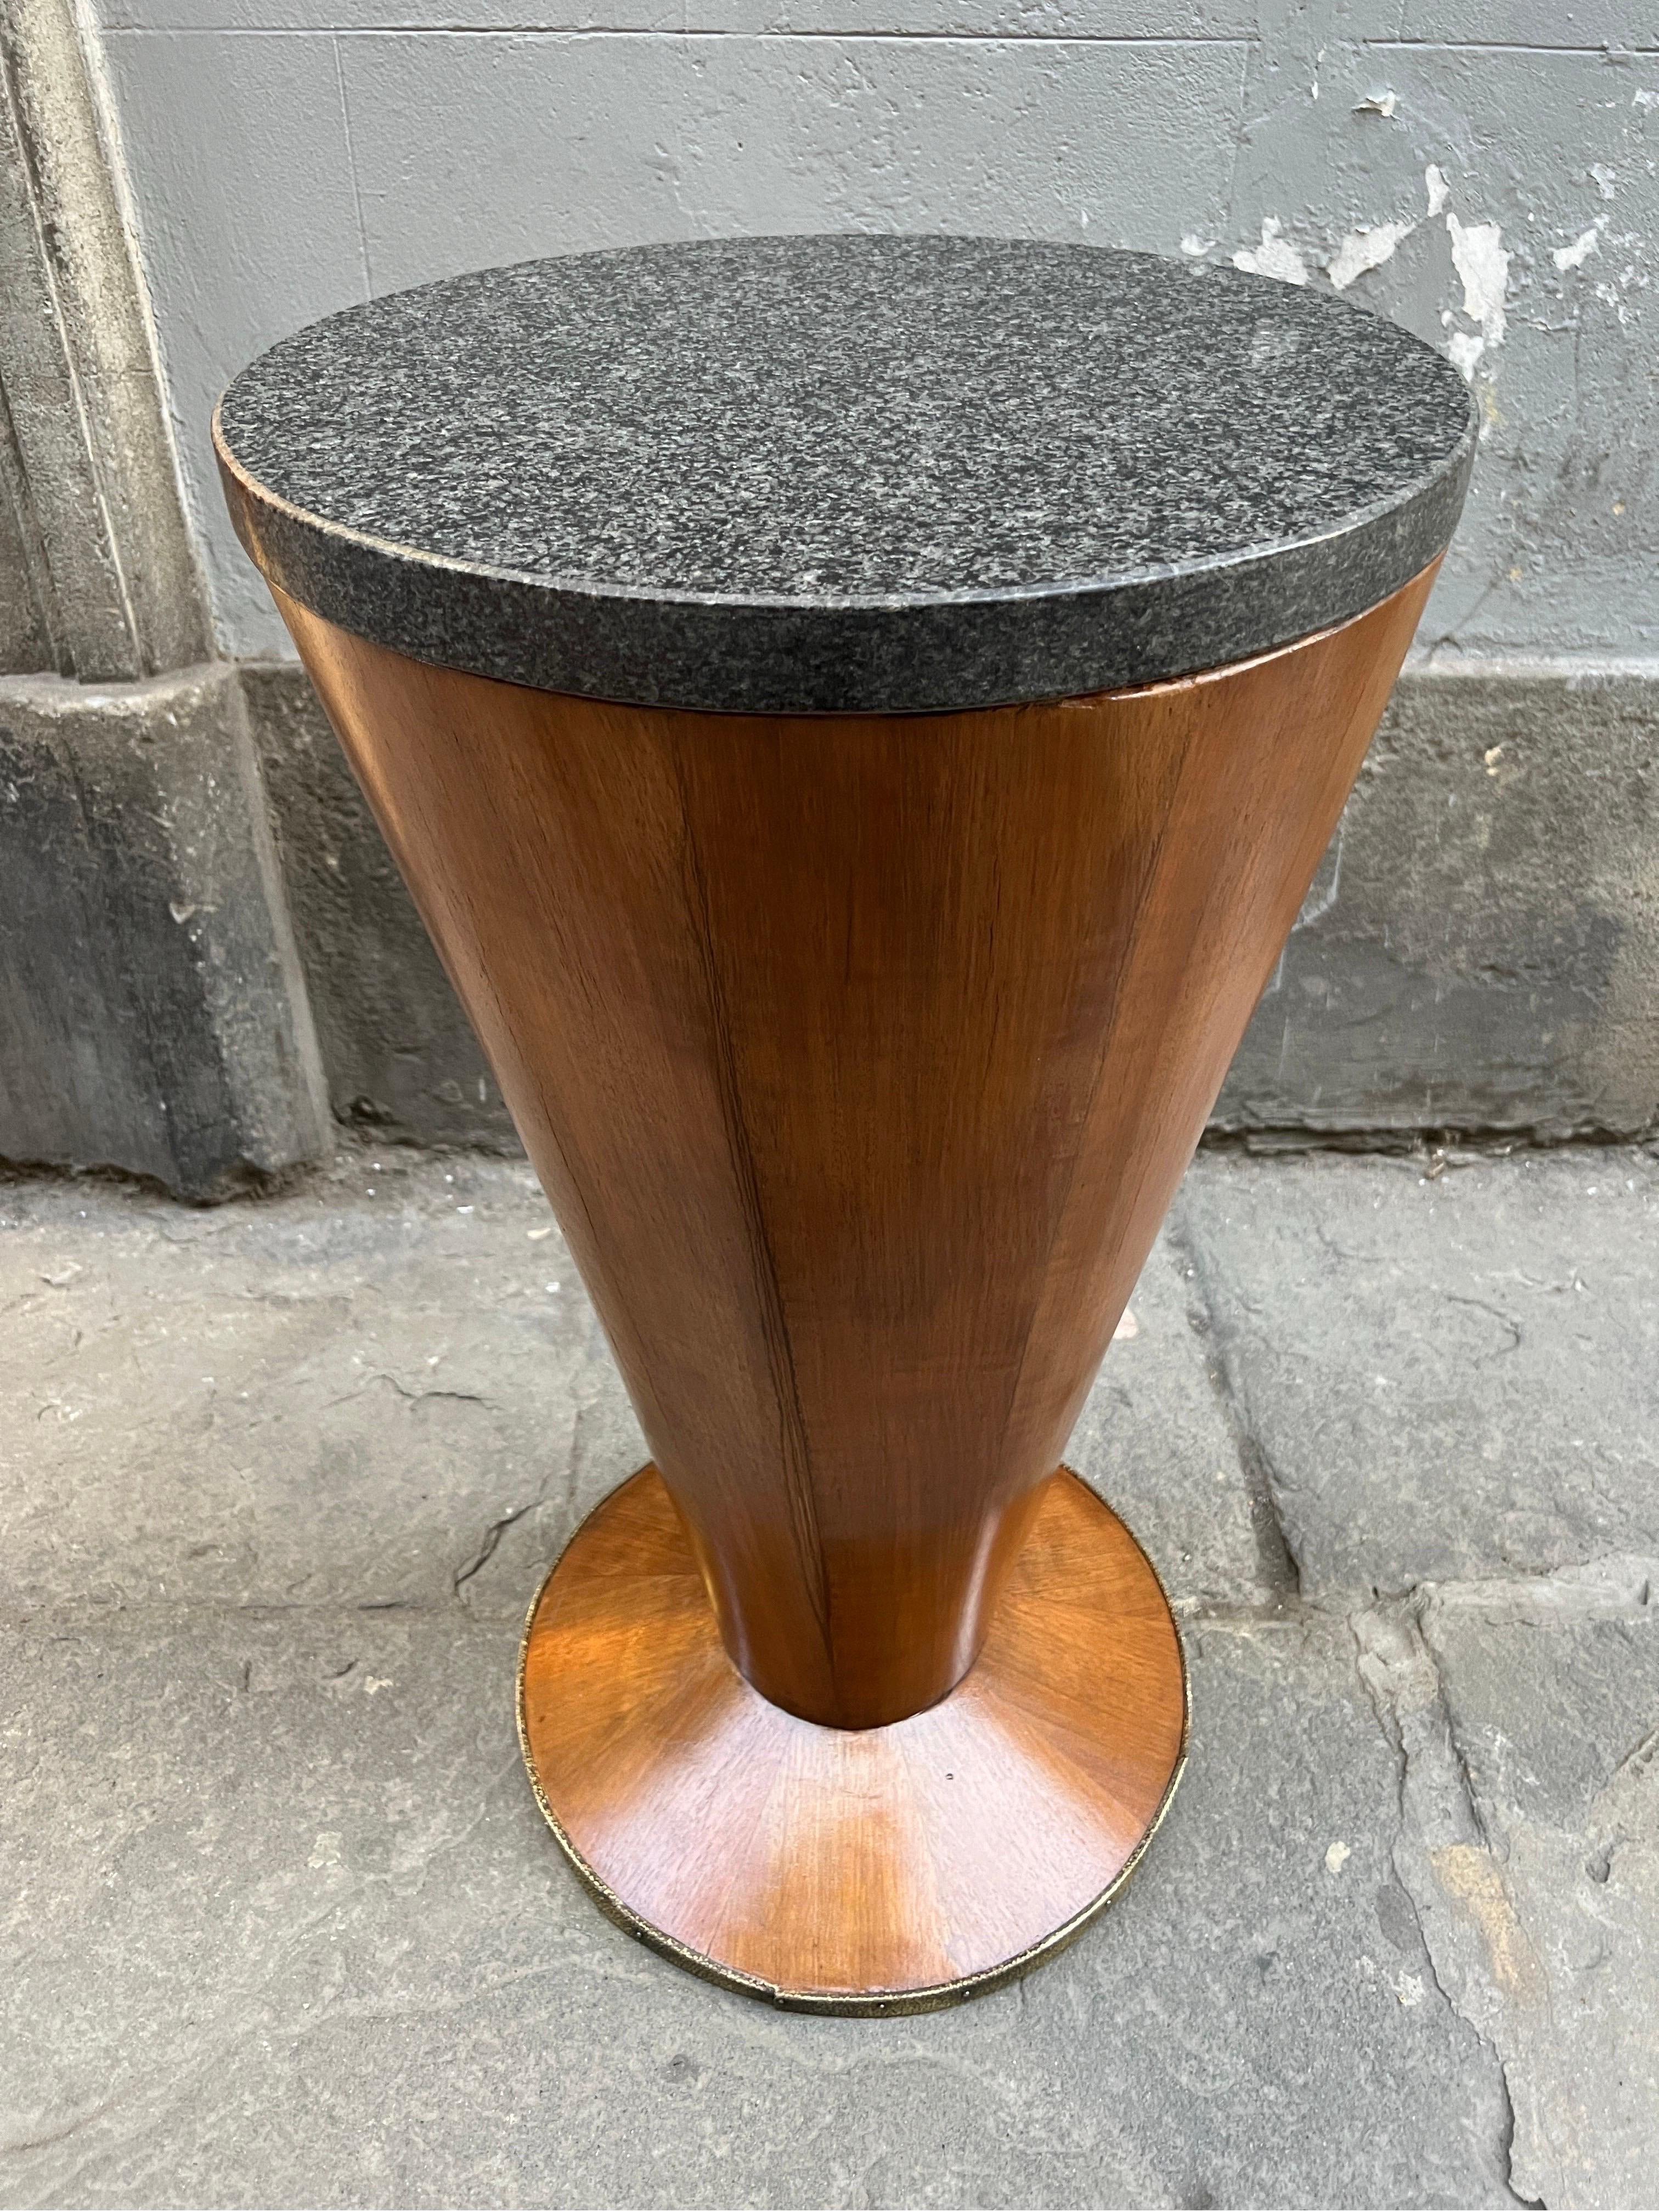 Pair of Art Deco Conical Cherry Wood Side Tables with Marble Top 1940s For Sale 3